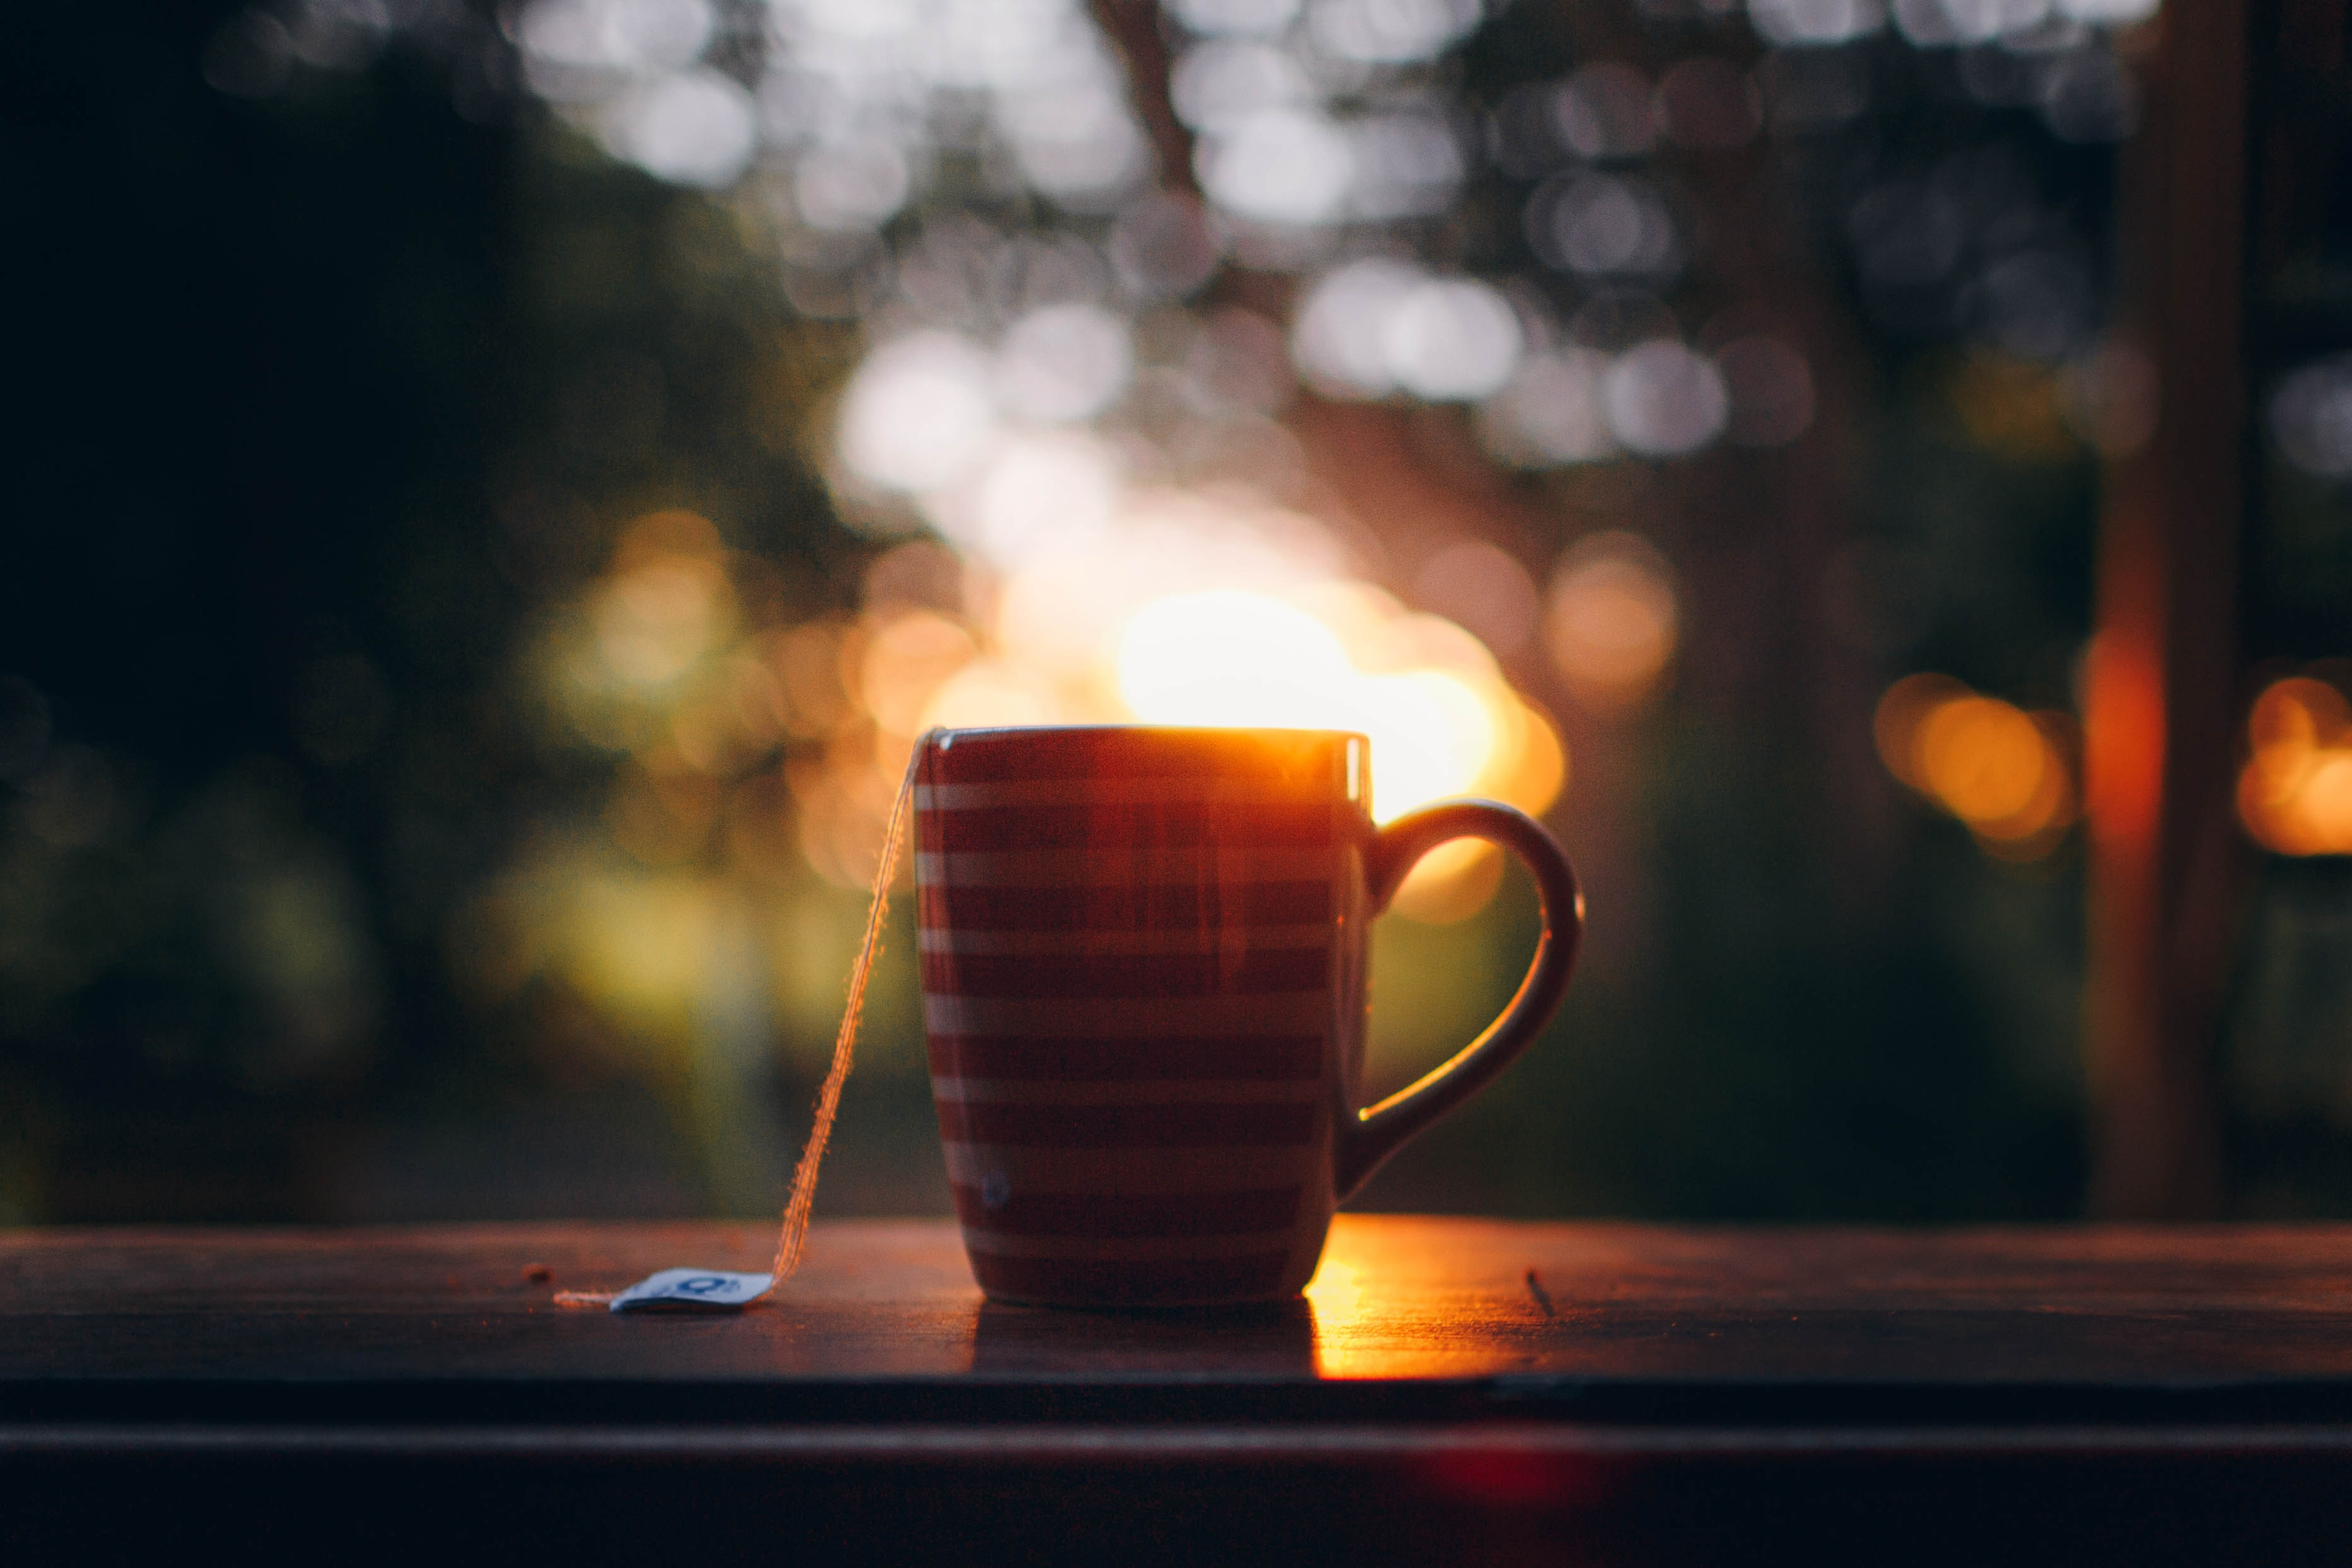 warm cup of tea at sunset